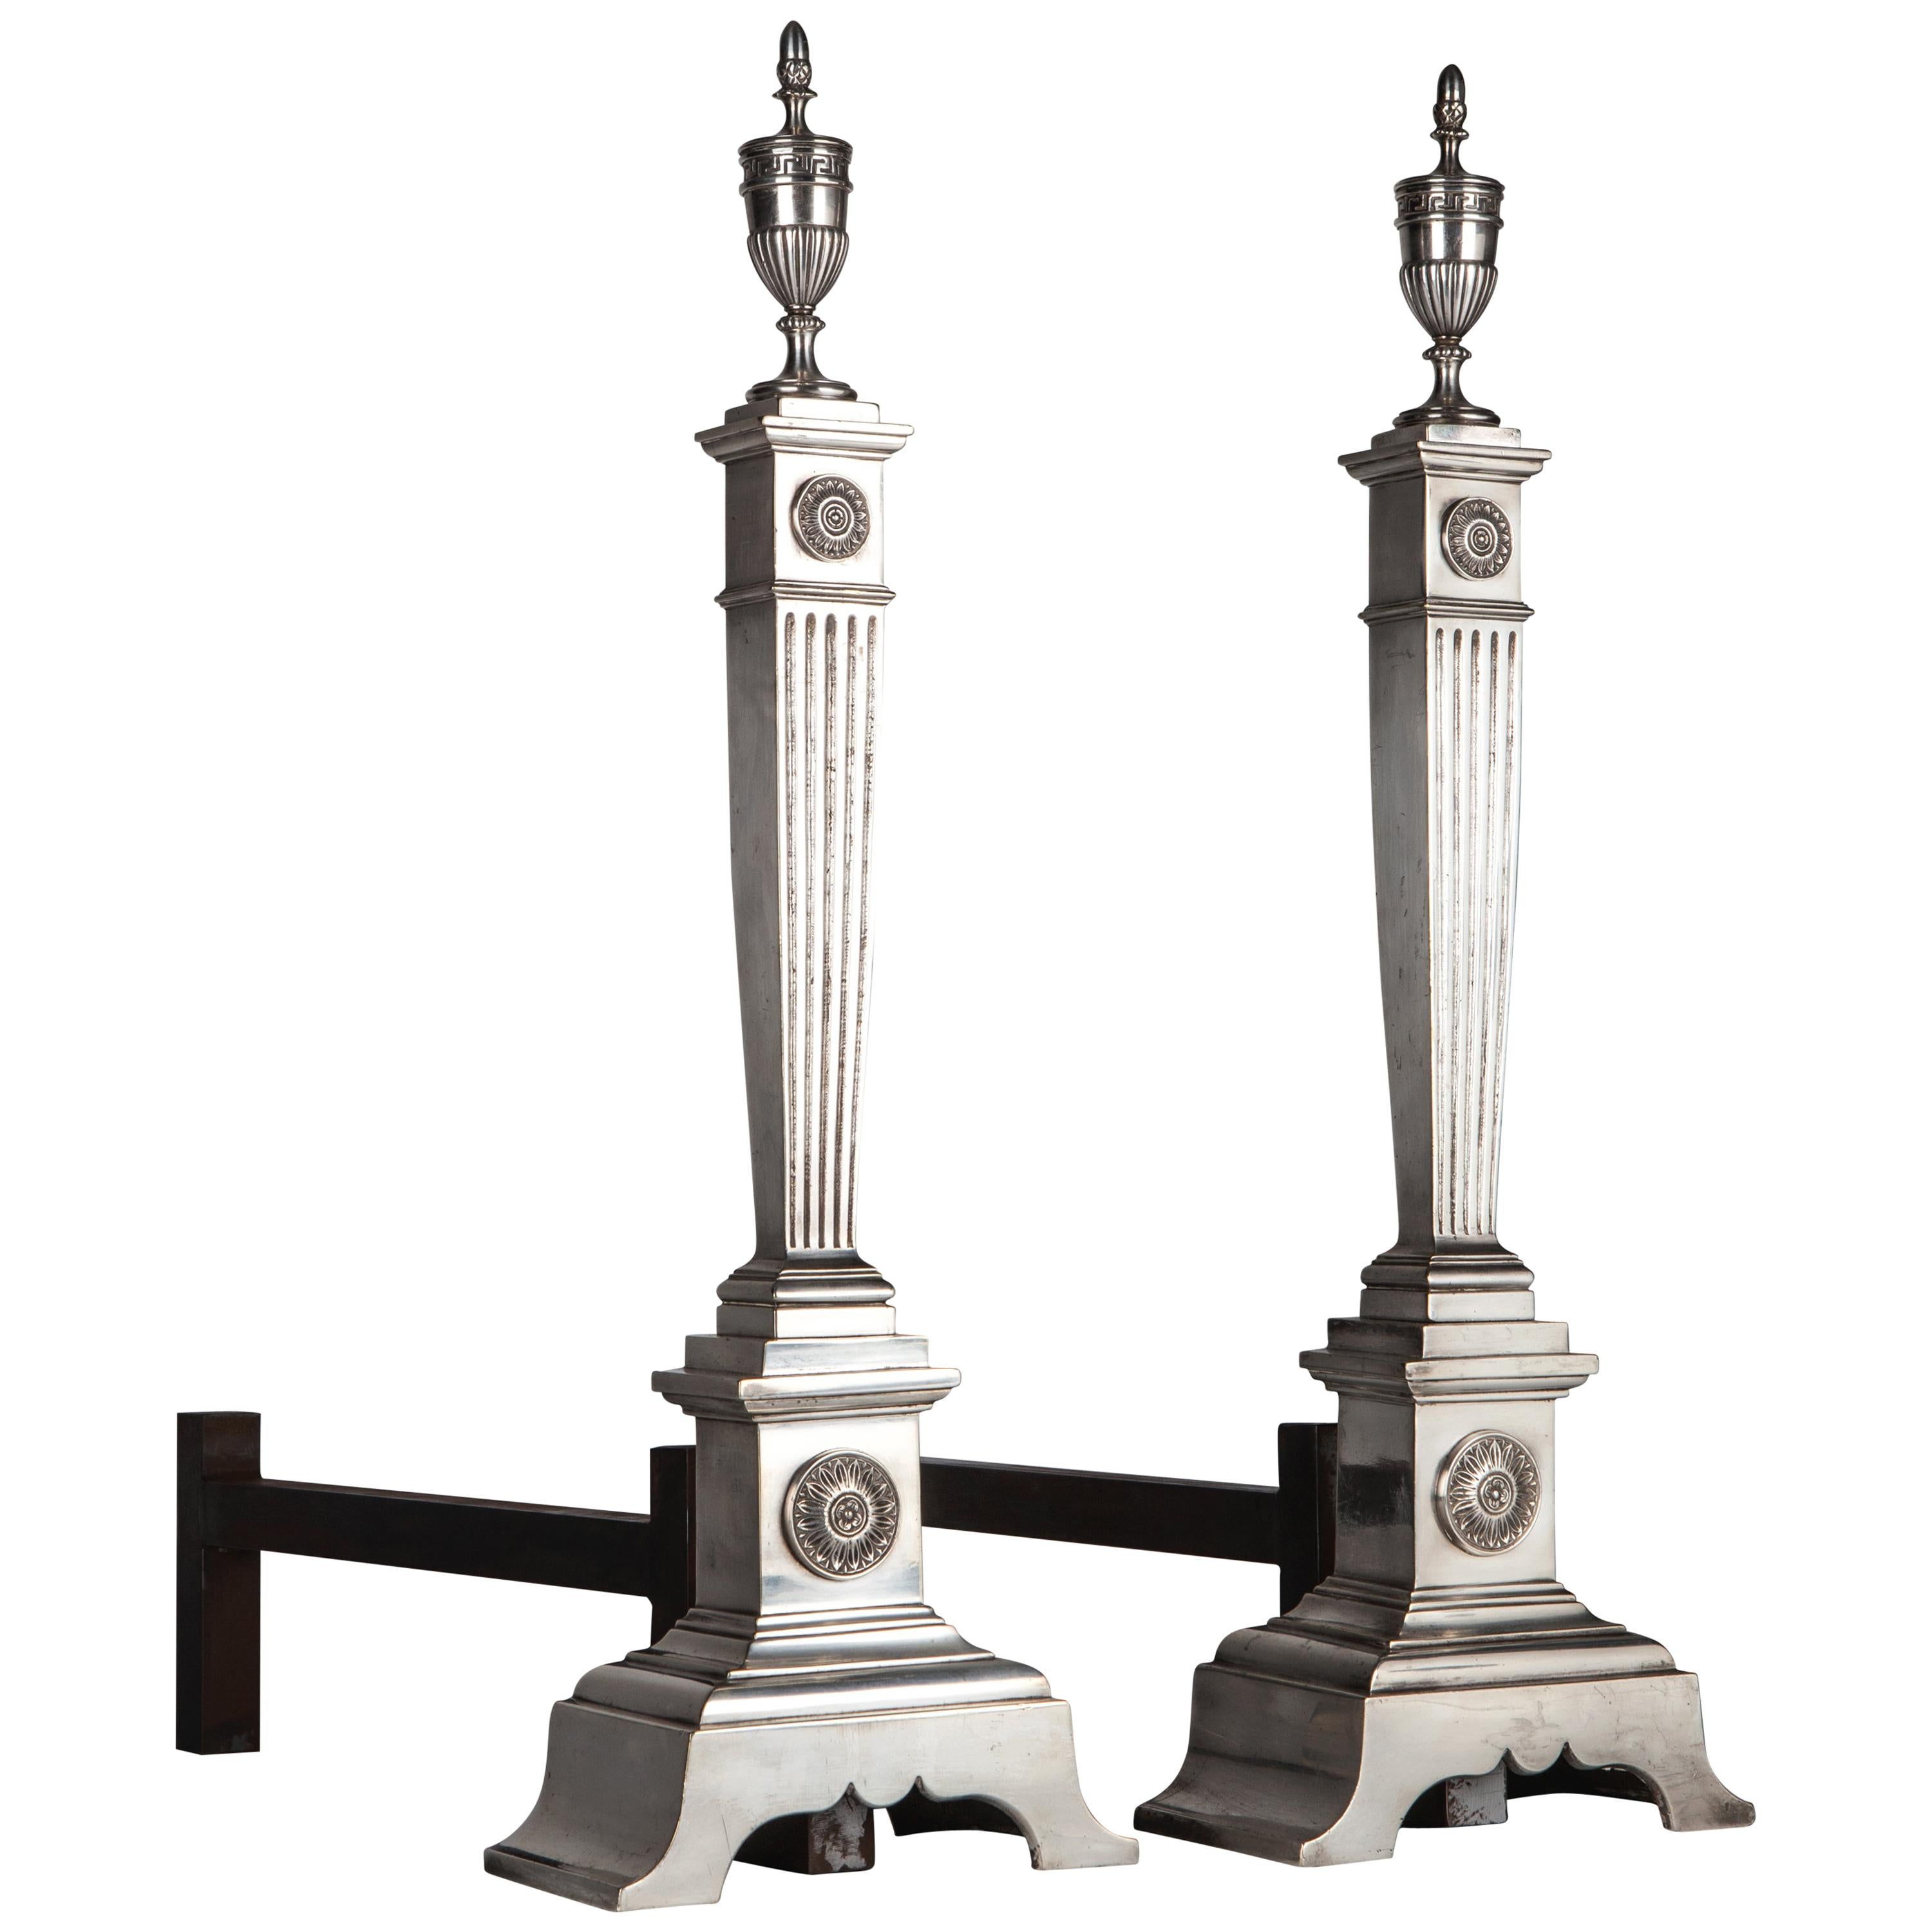 Silverplate Neoclassical Andirons with Fluted Columns and Urn Finials, c. 1910s For Sale